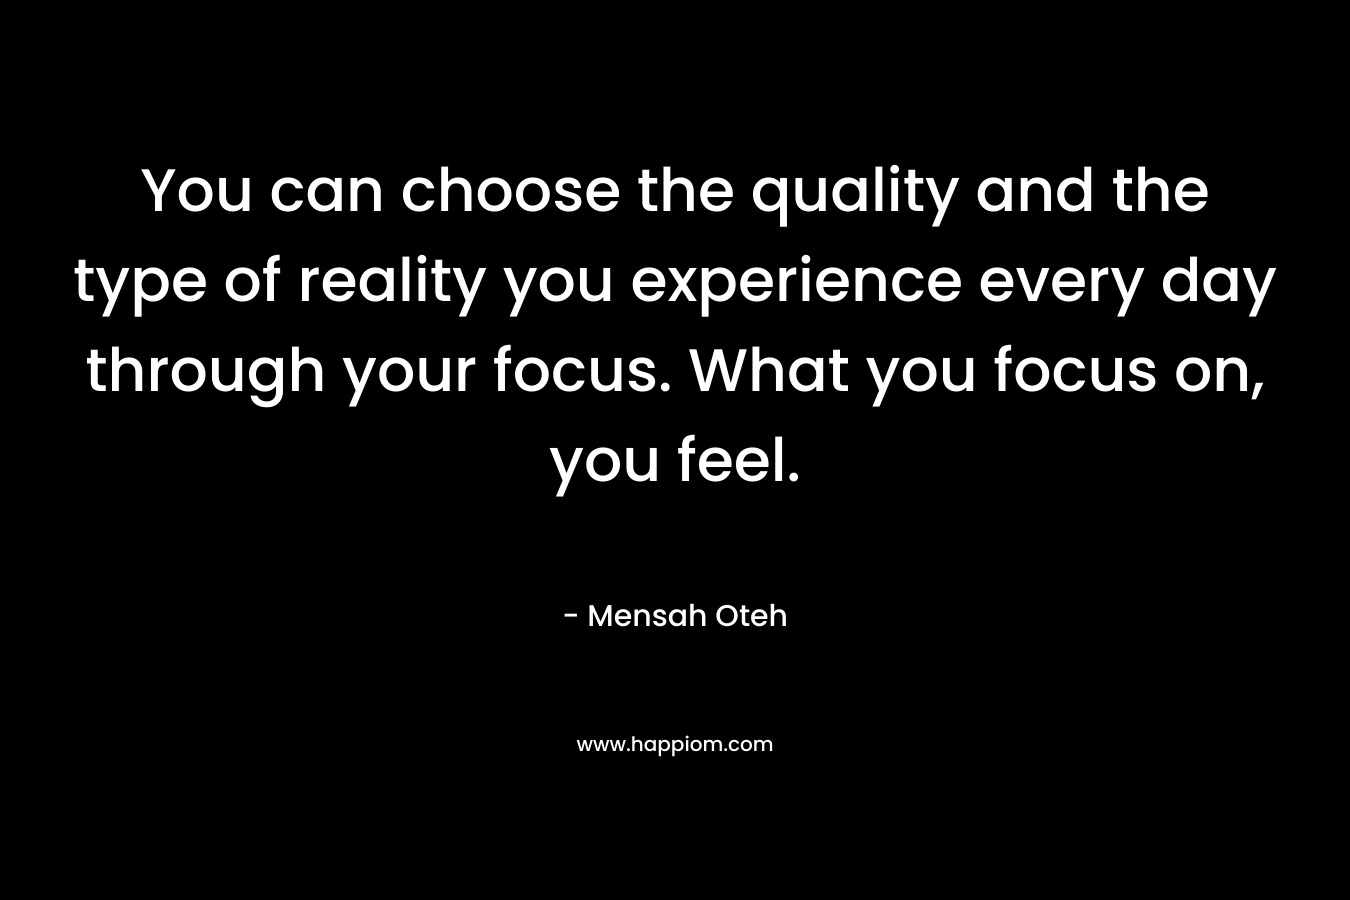 You can choose the quality and the type of reality you experience every day through your focus. What you focus on, you feel.